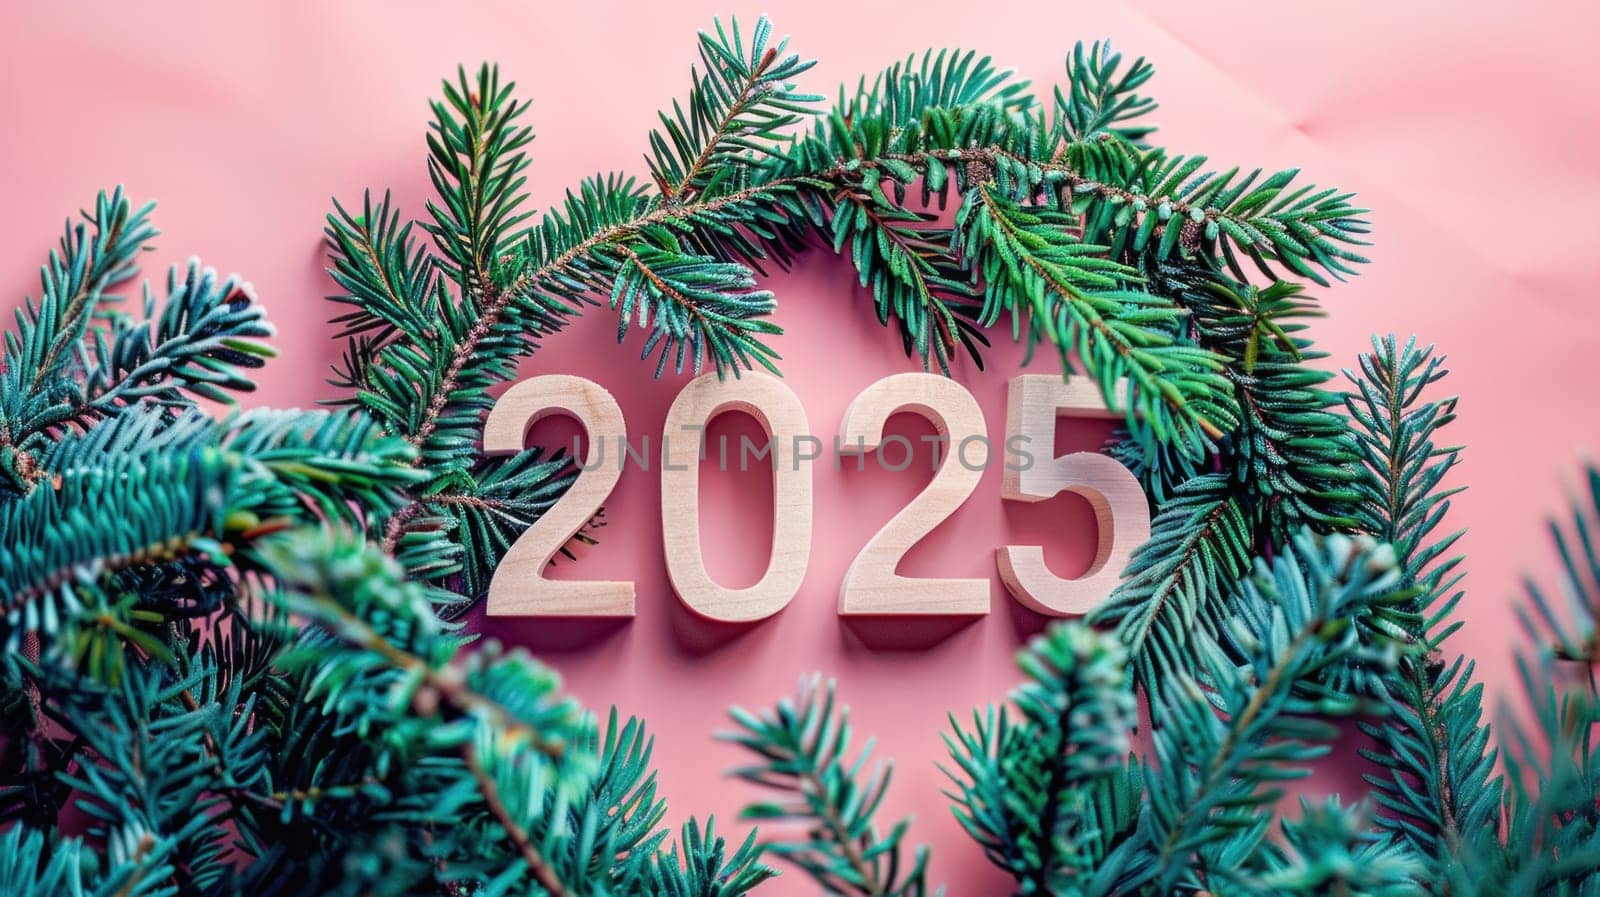 2025 is celebrated with pine branches against a pink backdrop, symbolizing the start of new year festivities